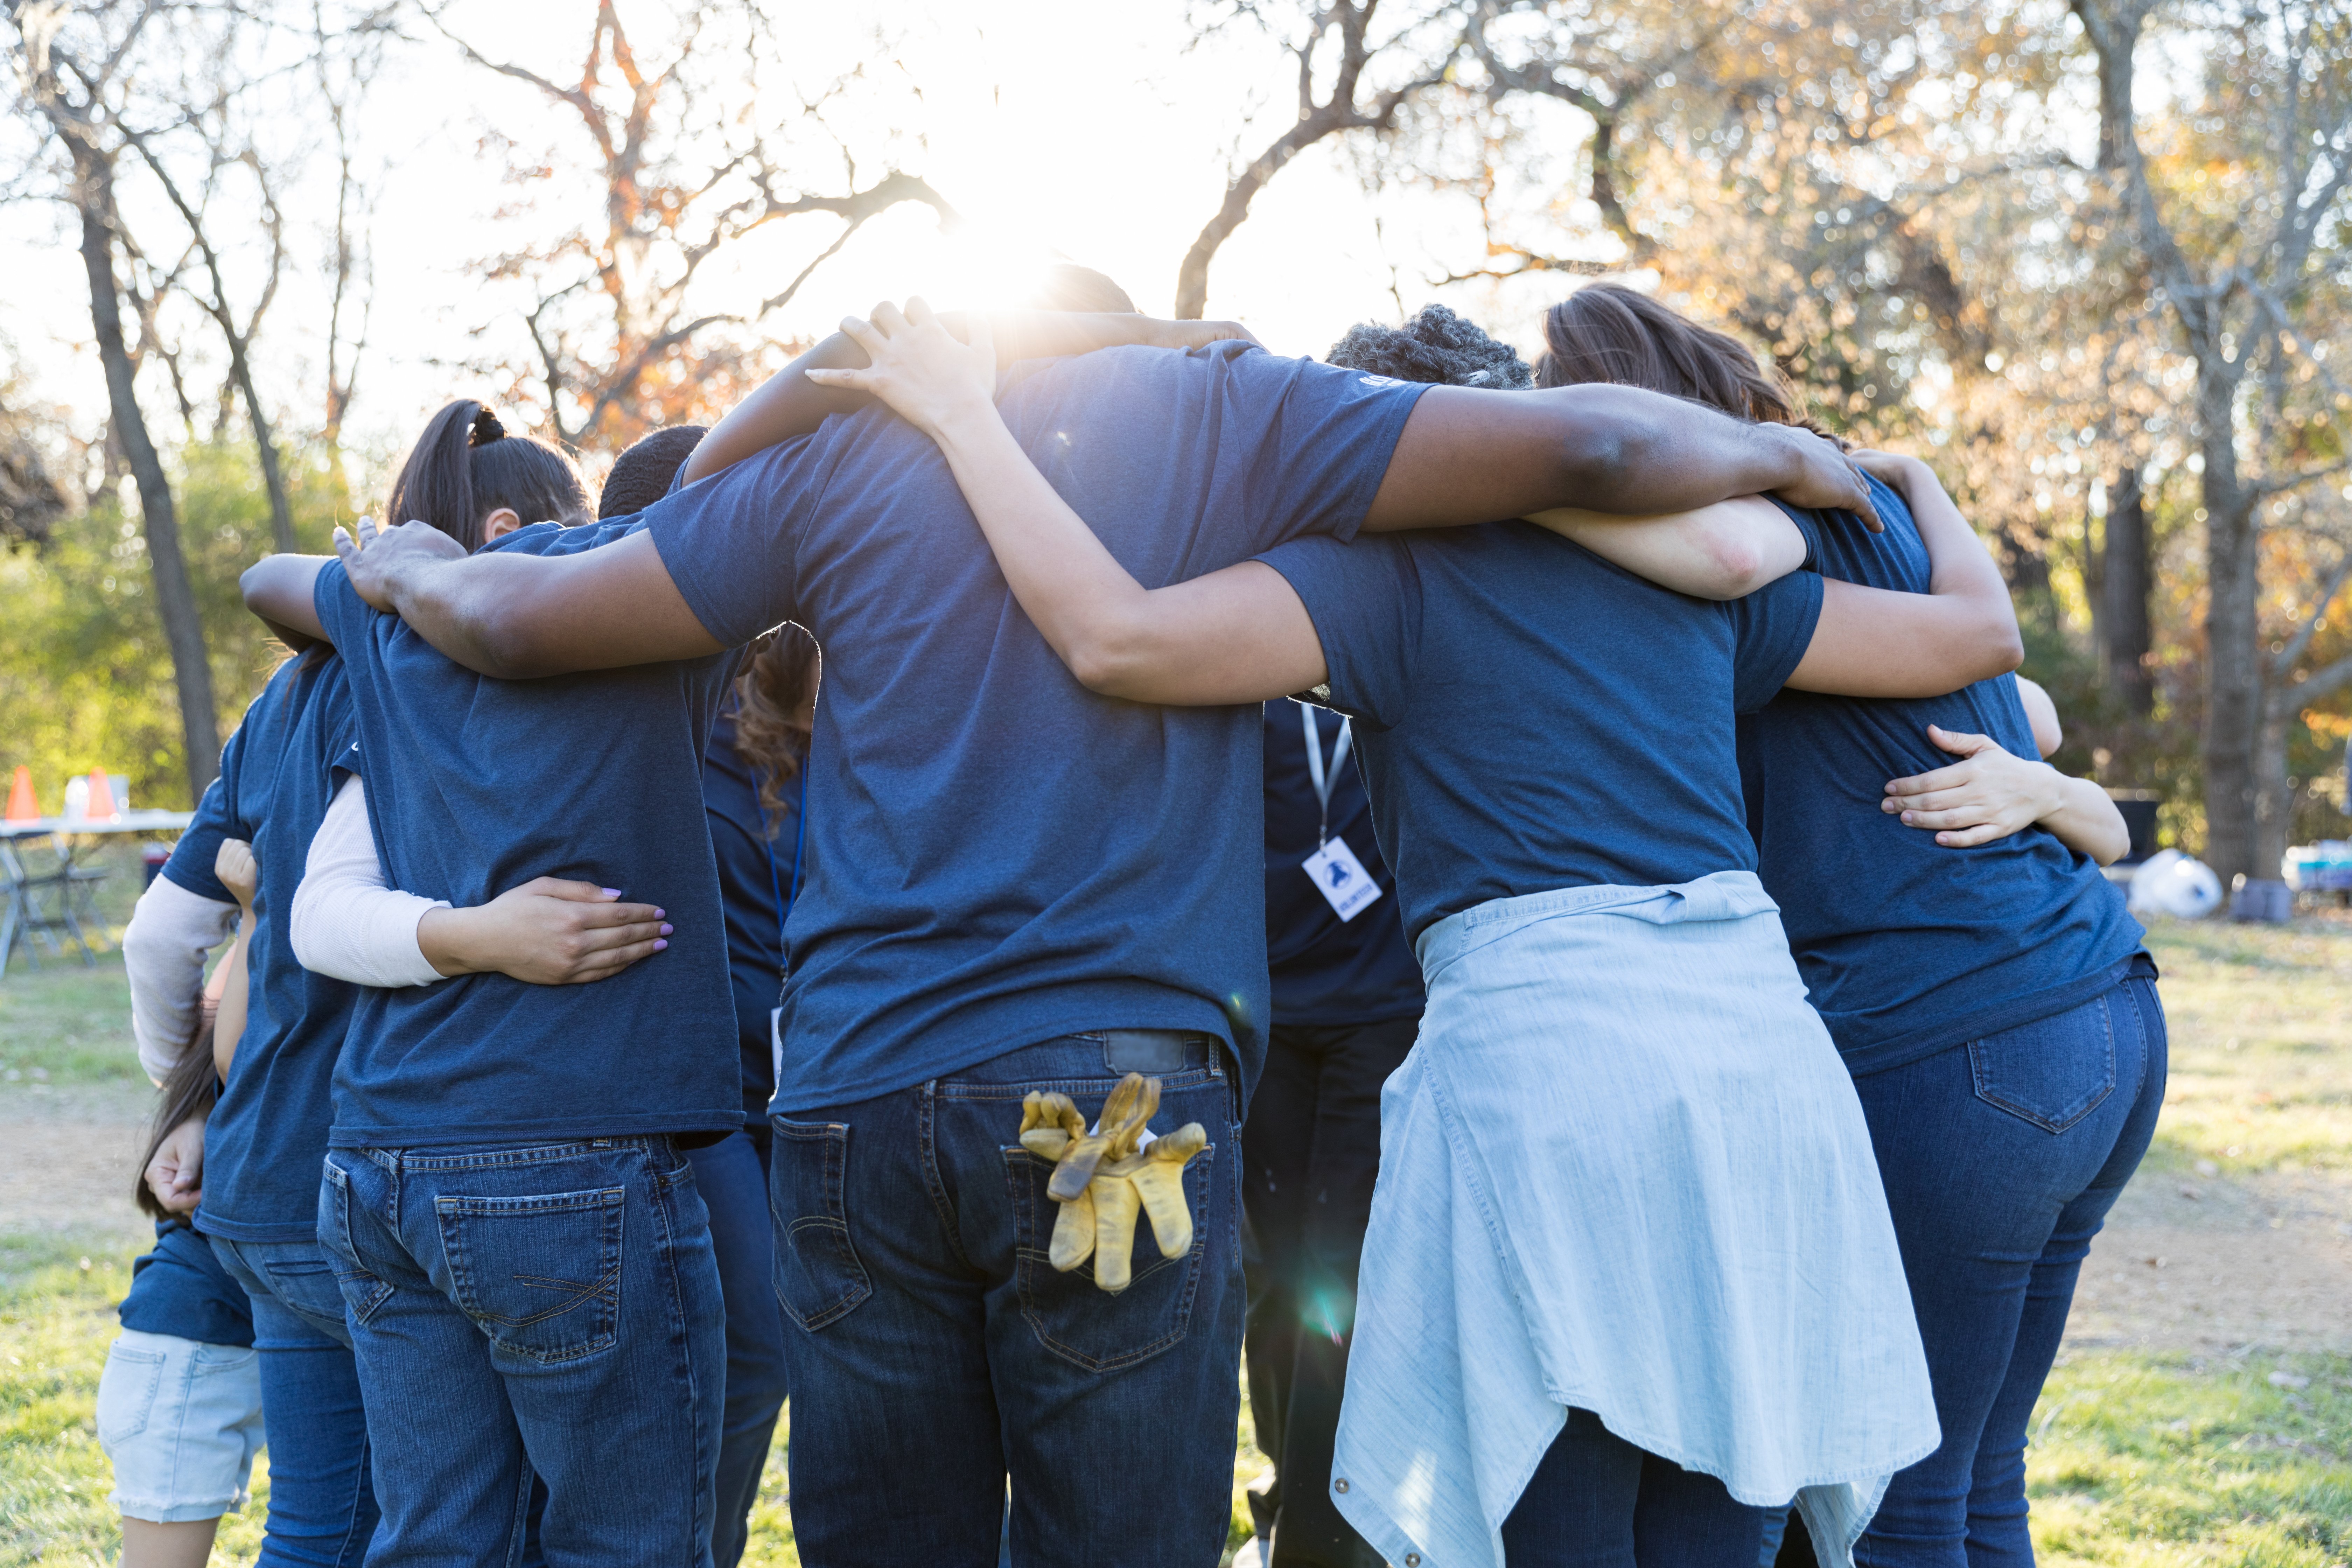 Huddle of people in blue shirts - Getty Image